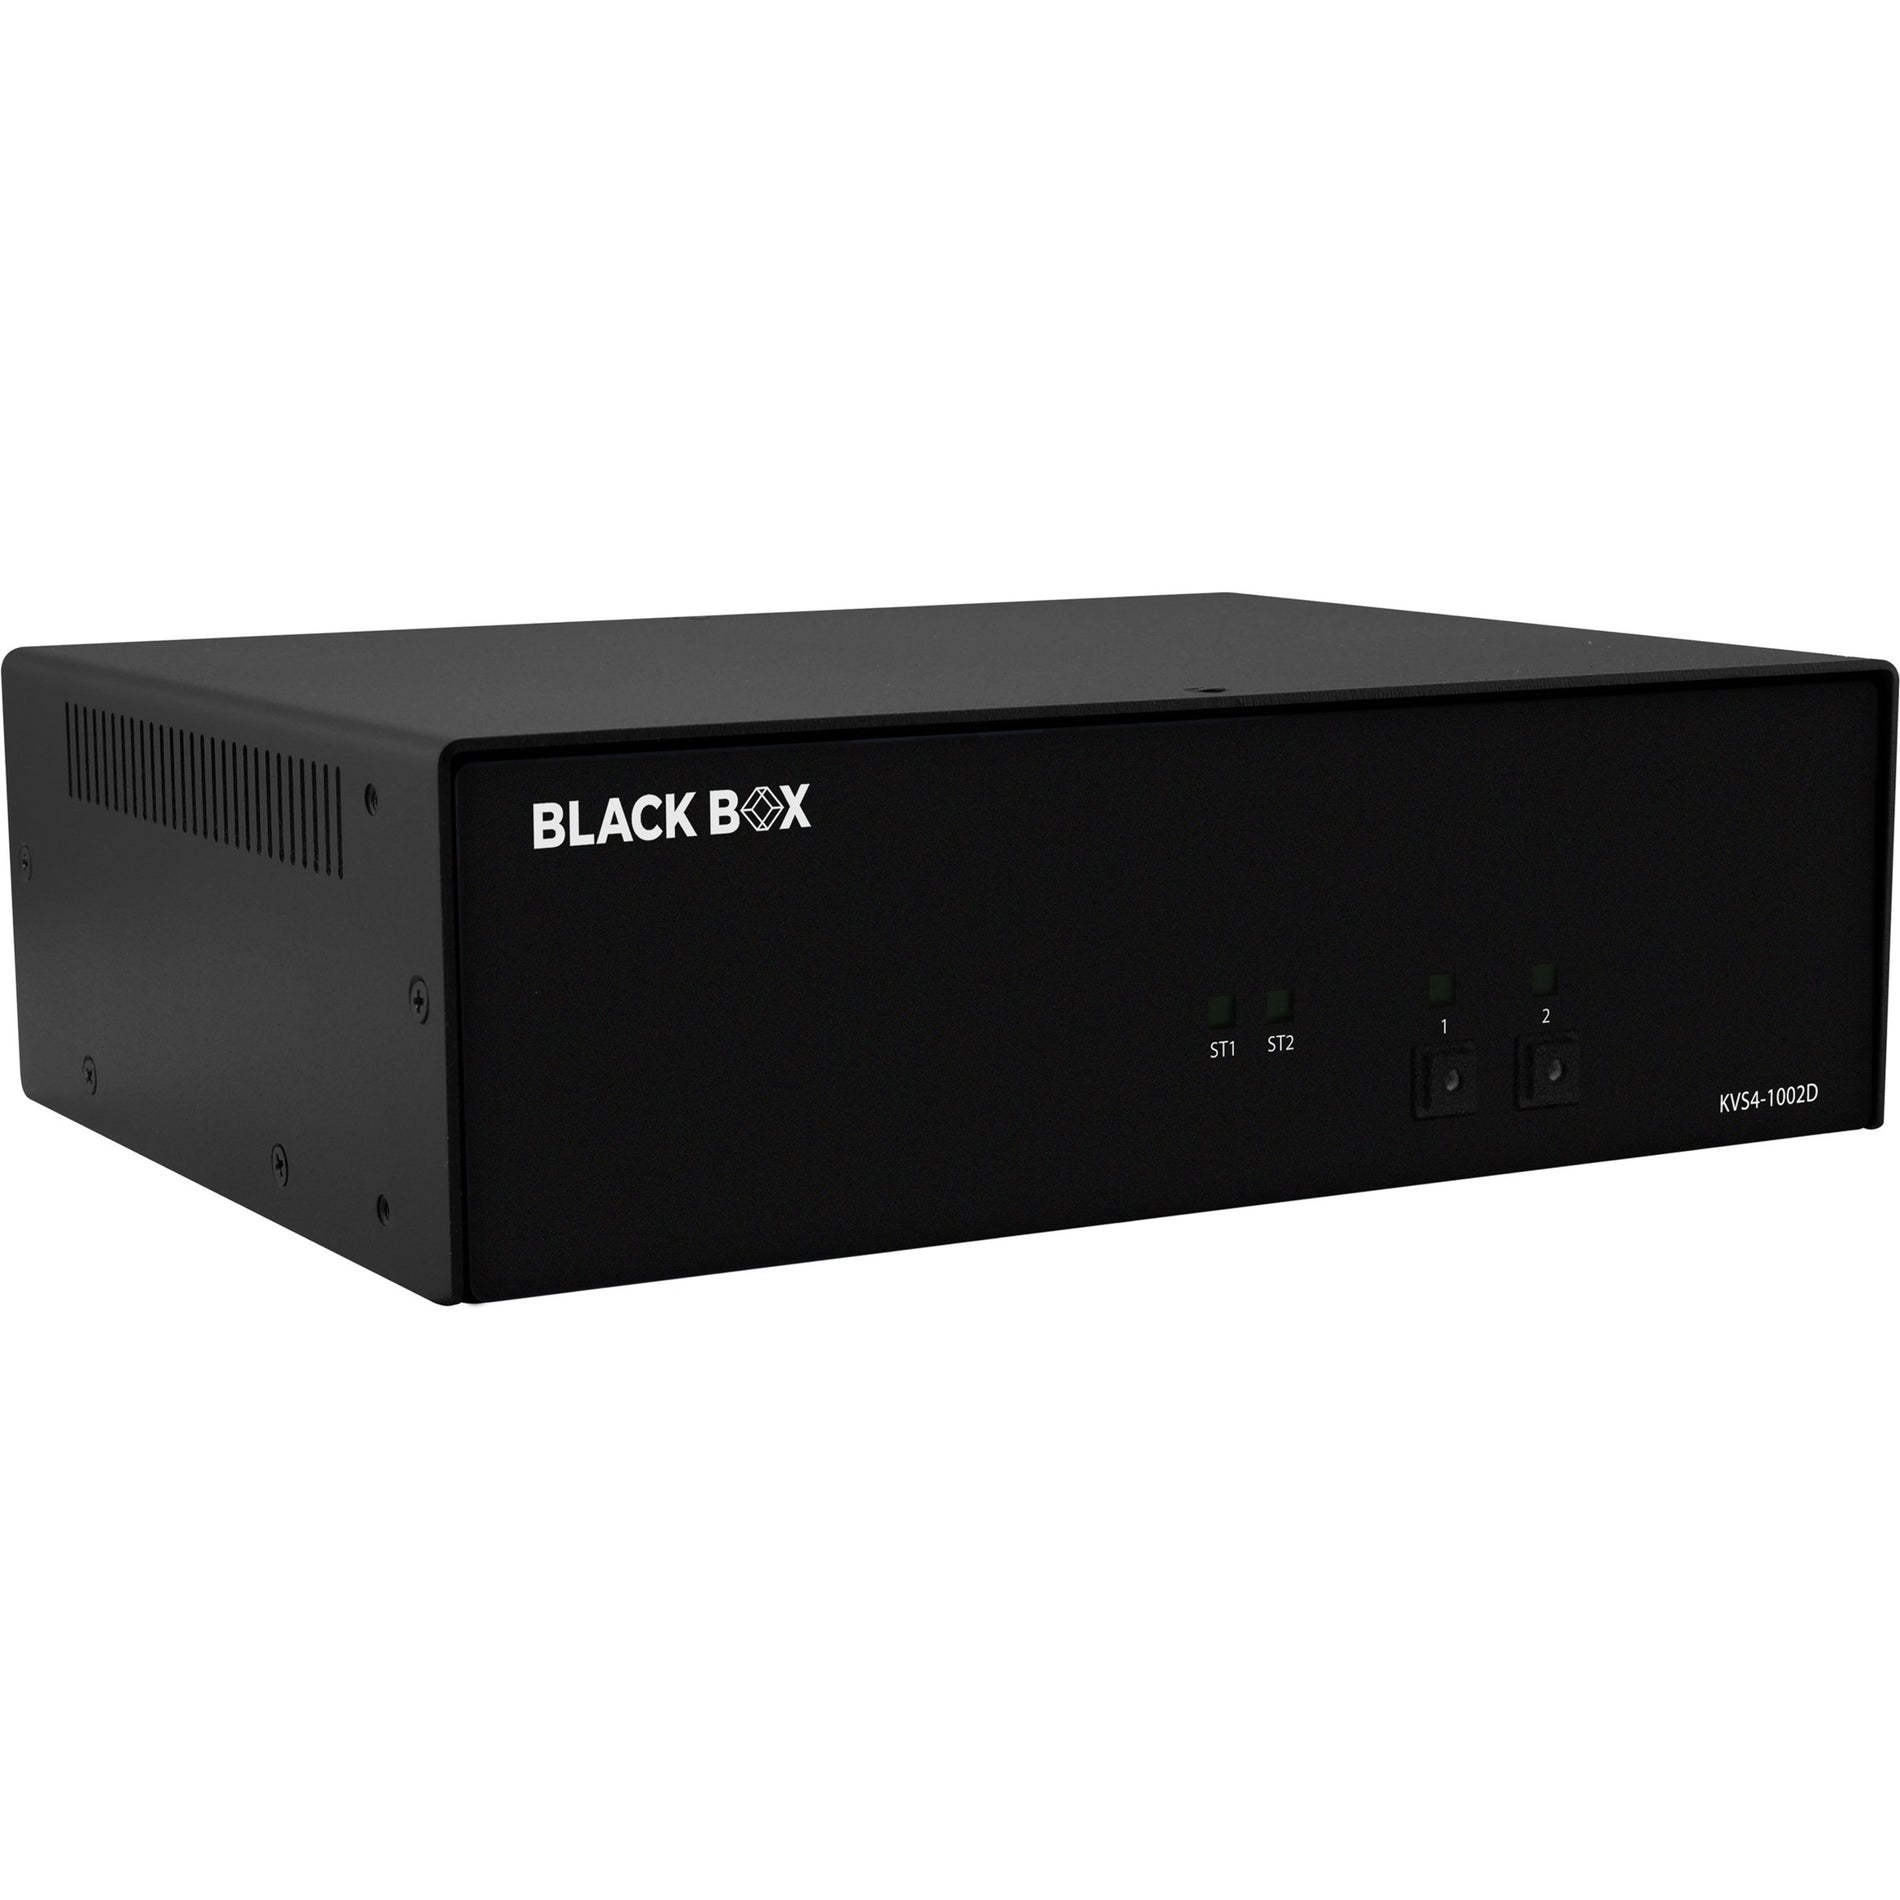 Black Box KVS4-1002D Secure KVM Switch - DVI-I, 2560 x 1600, 2 Computers Supported, 1 Local User